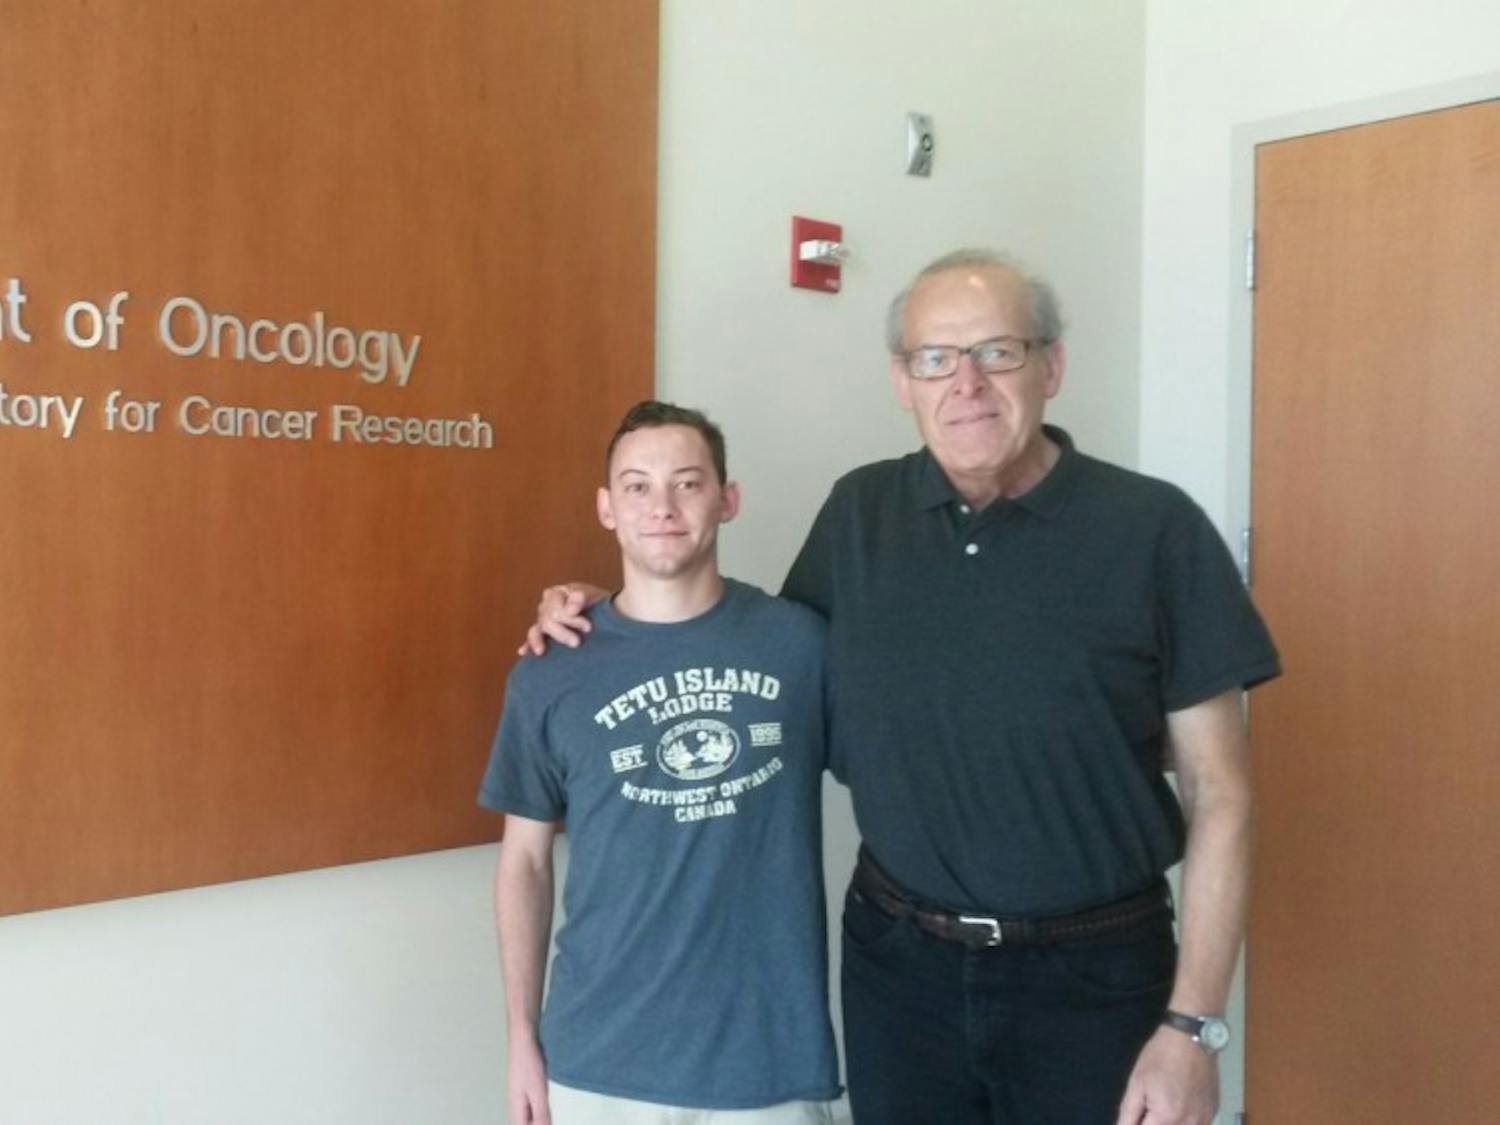 Jacob Blitstein and Dr. Falh